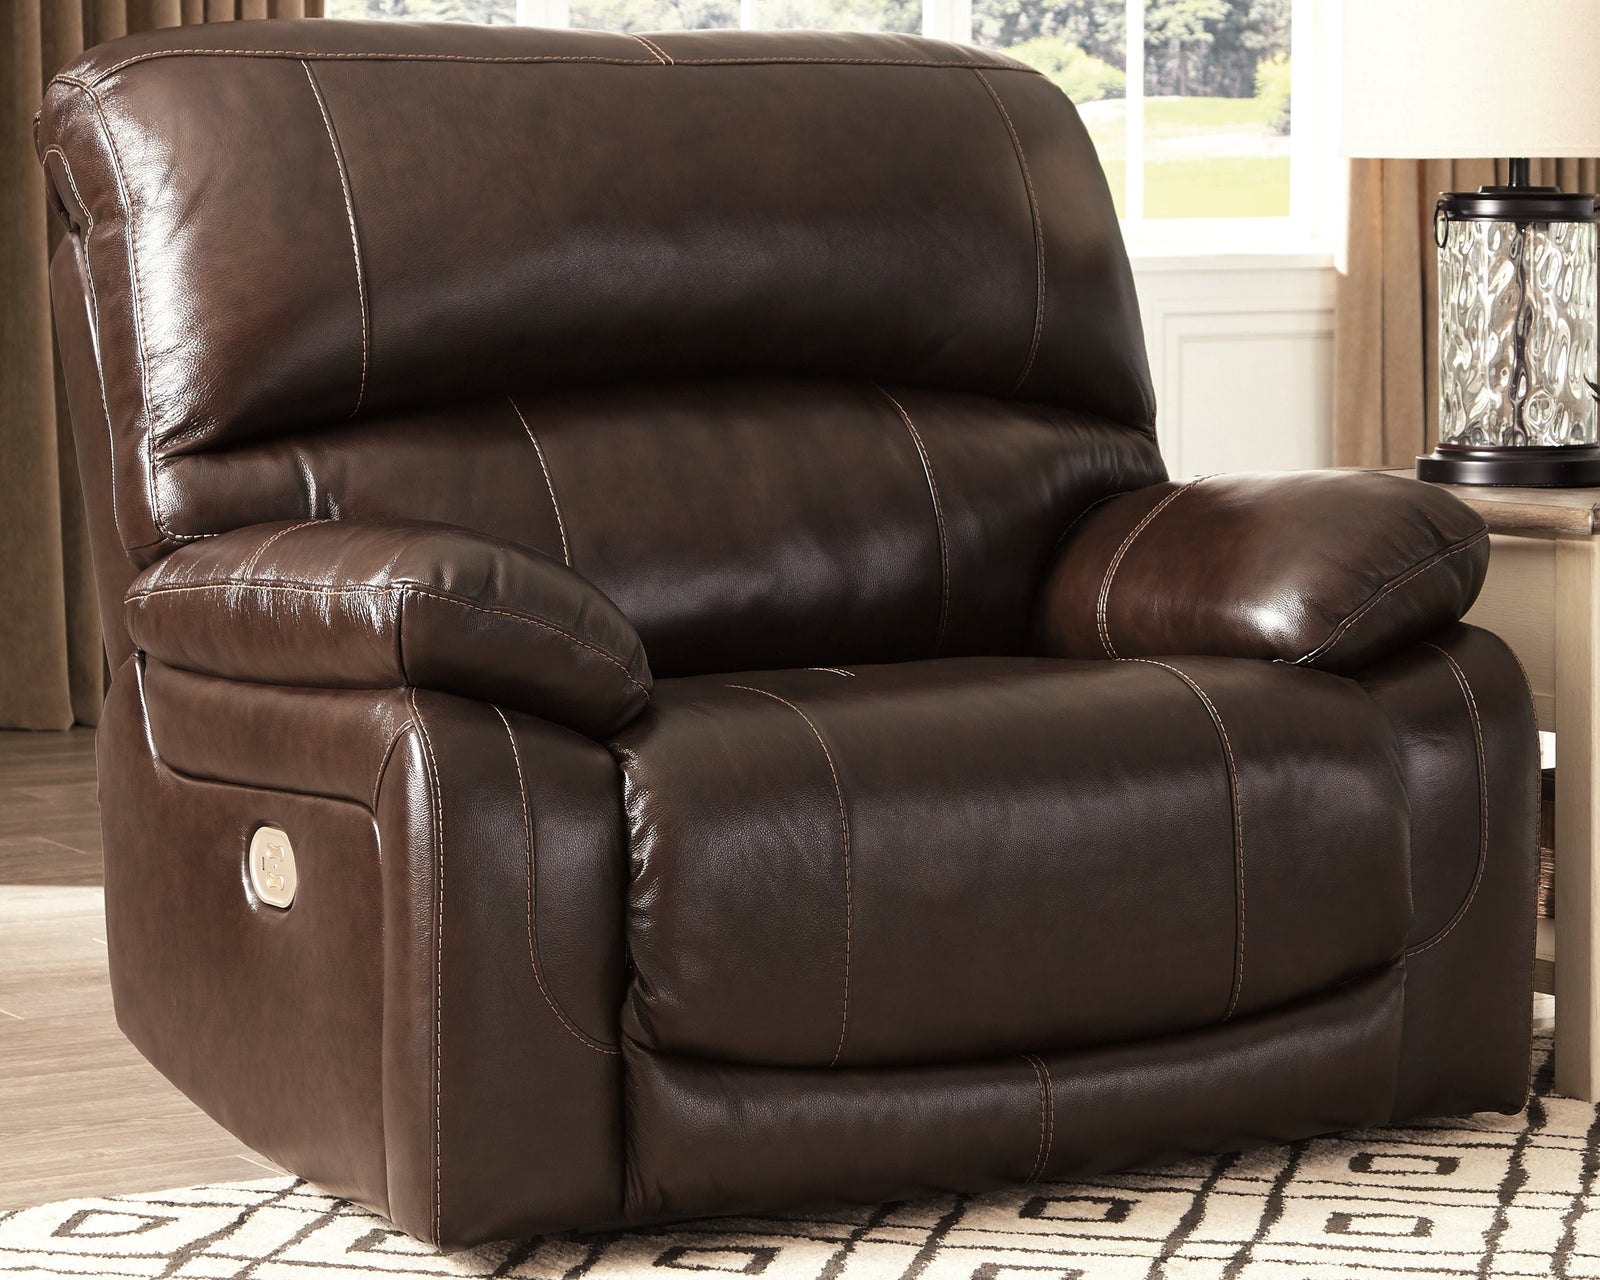 Hallstrung Chocolate Leather Power Recliner